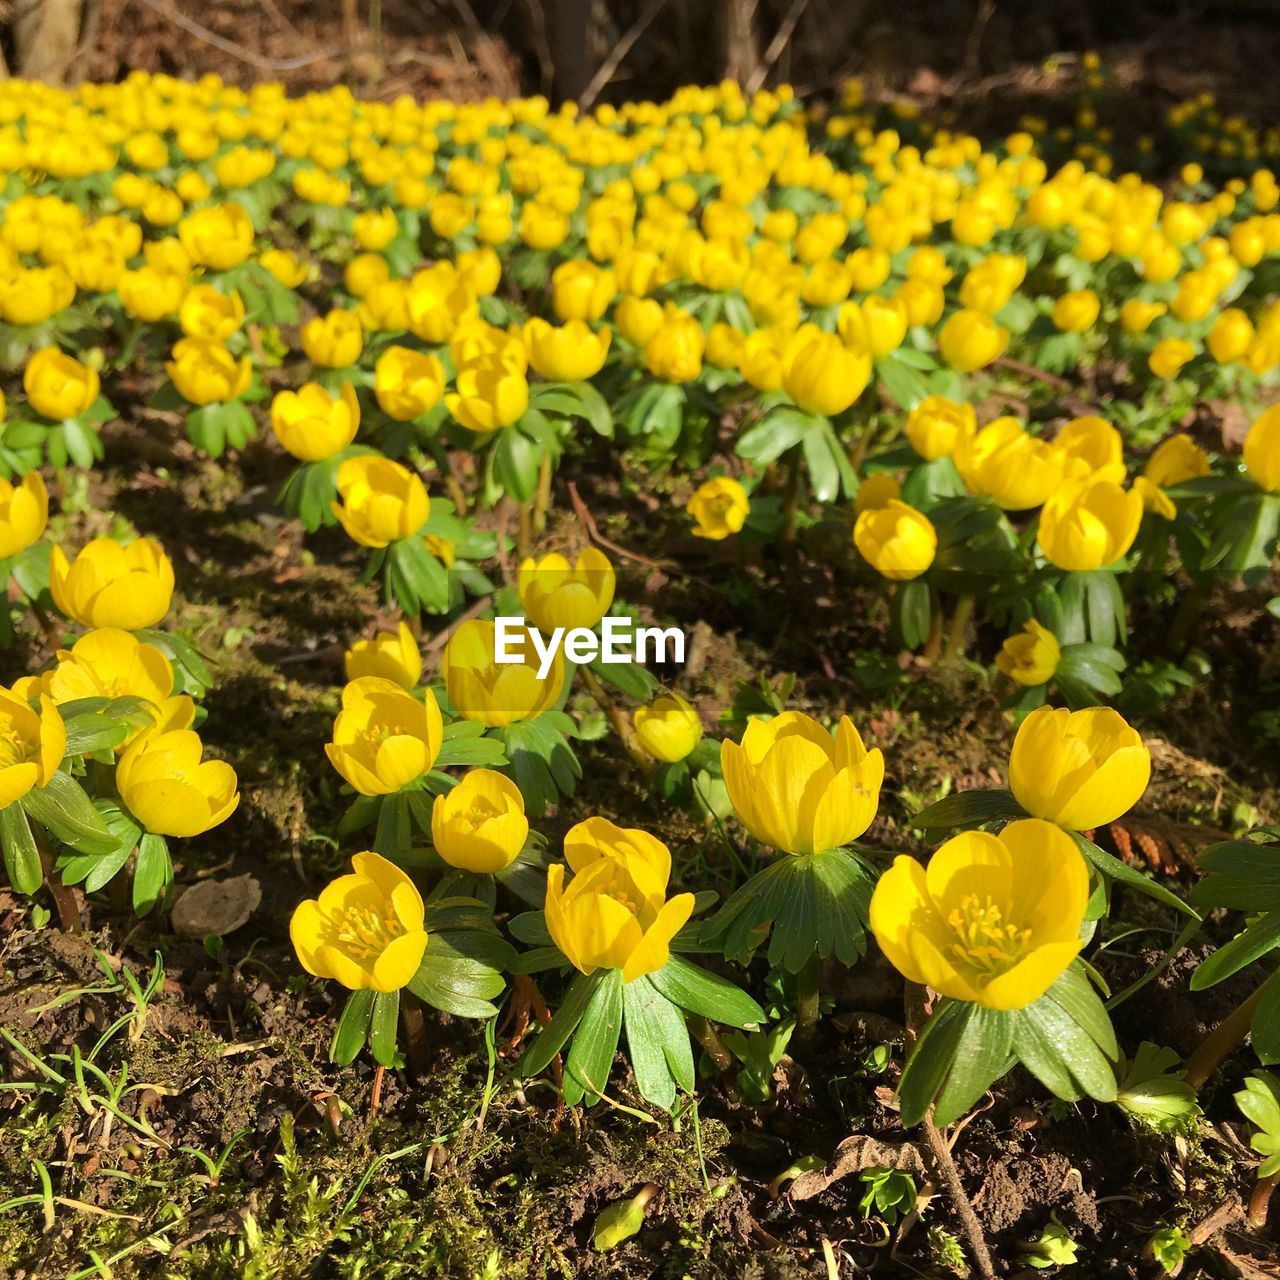 CLOSE-UP OF YELLOW FLOWERING PLANTS IN FIELD